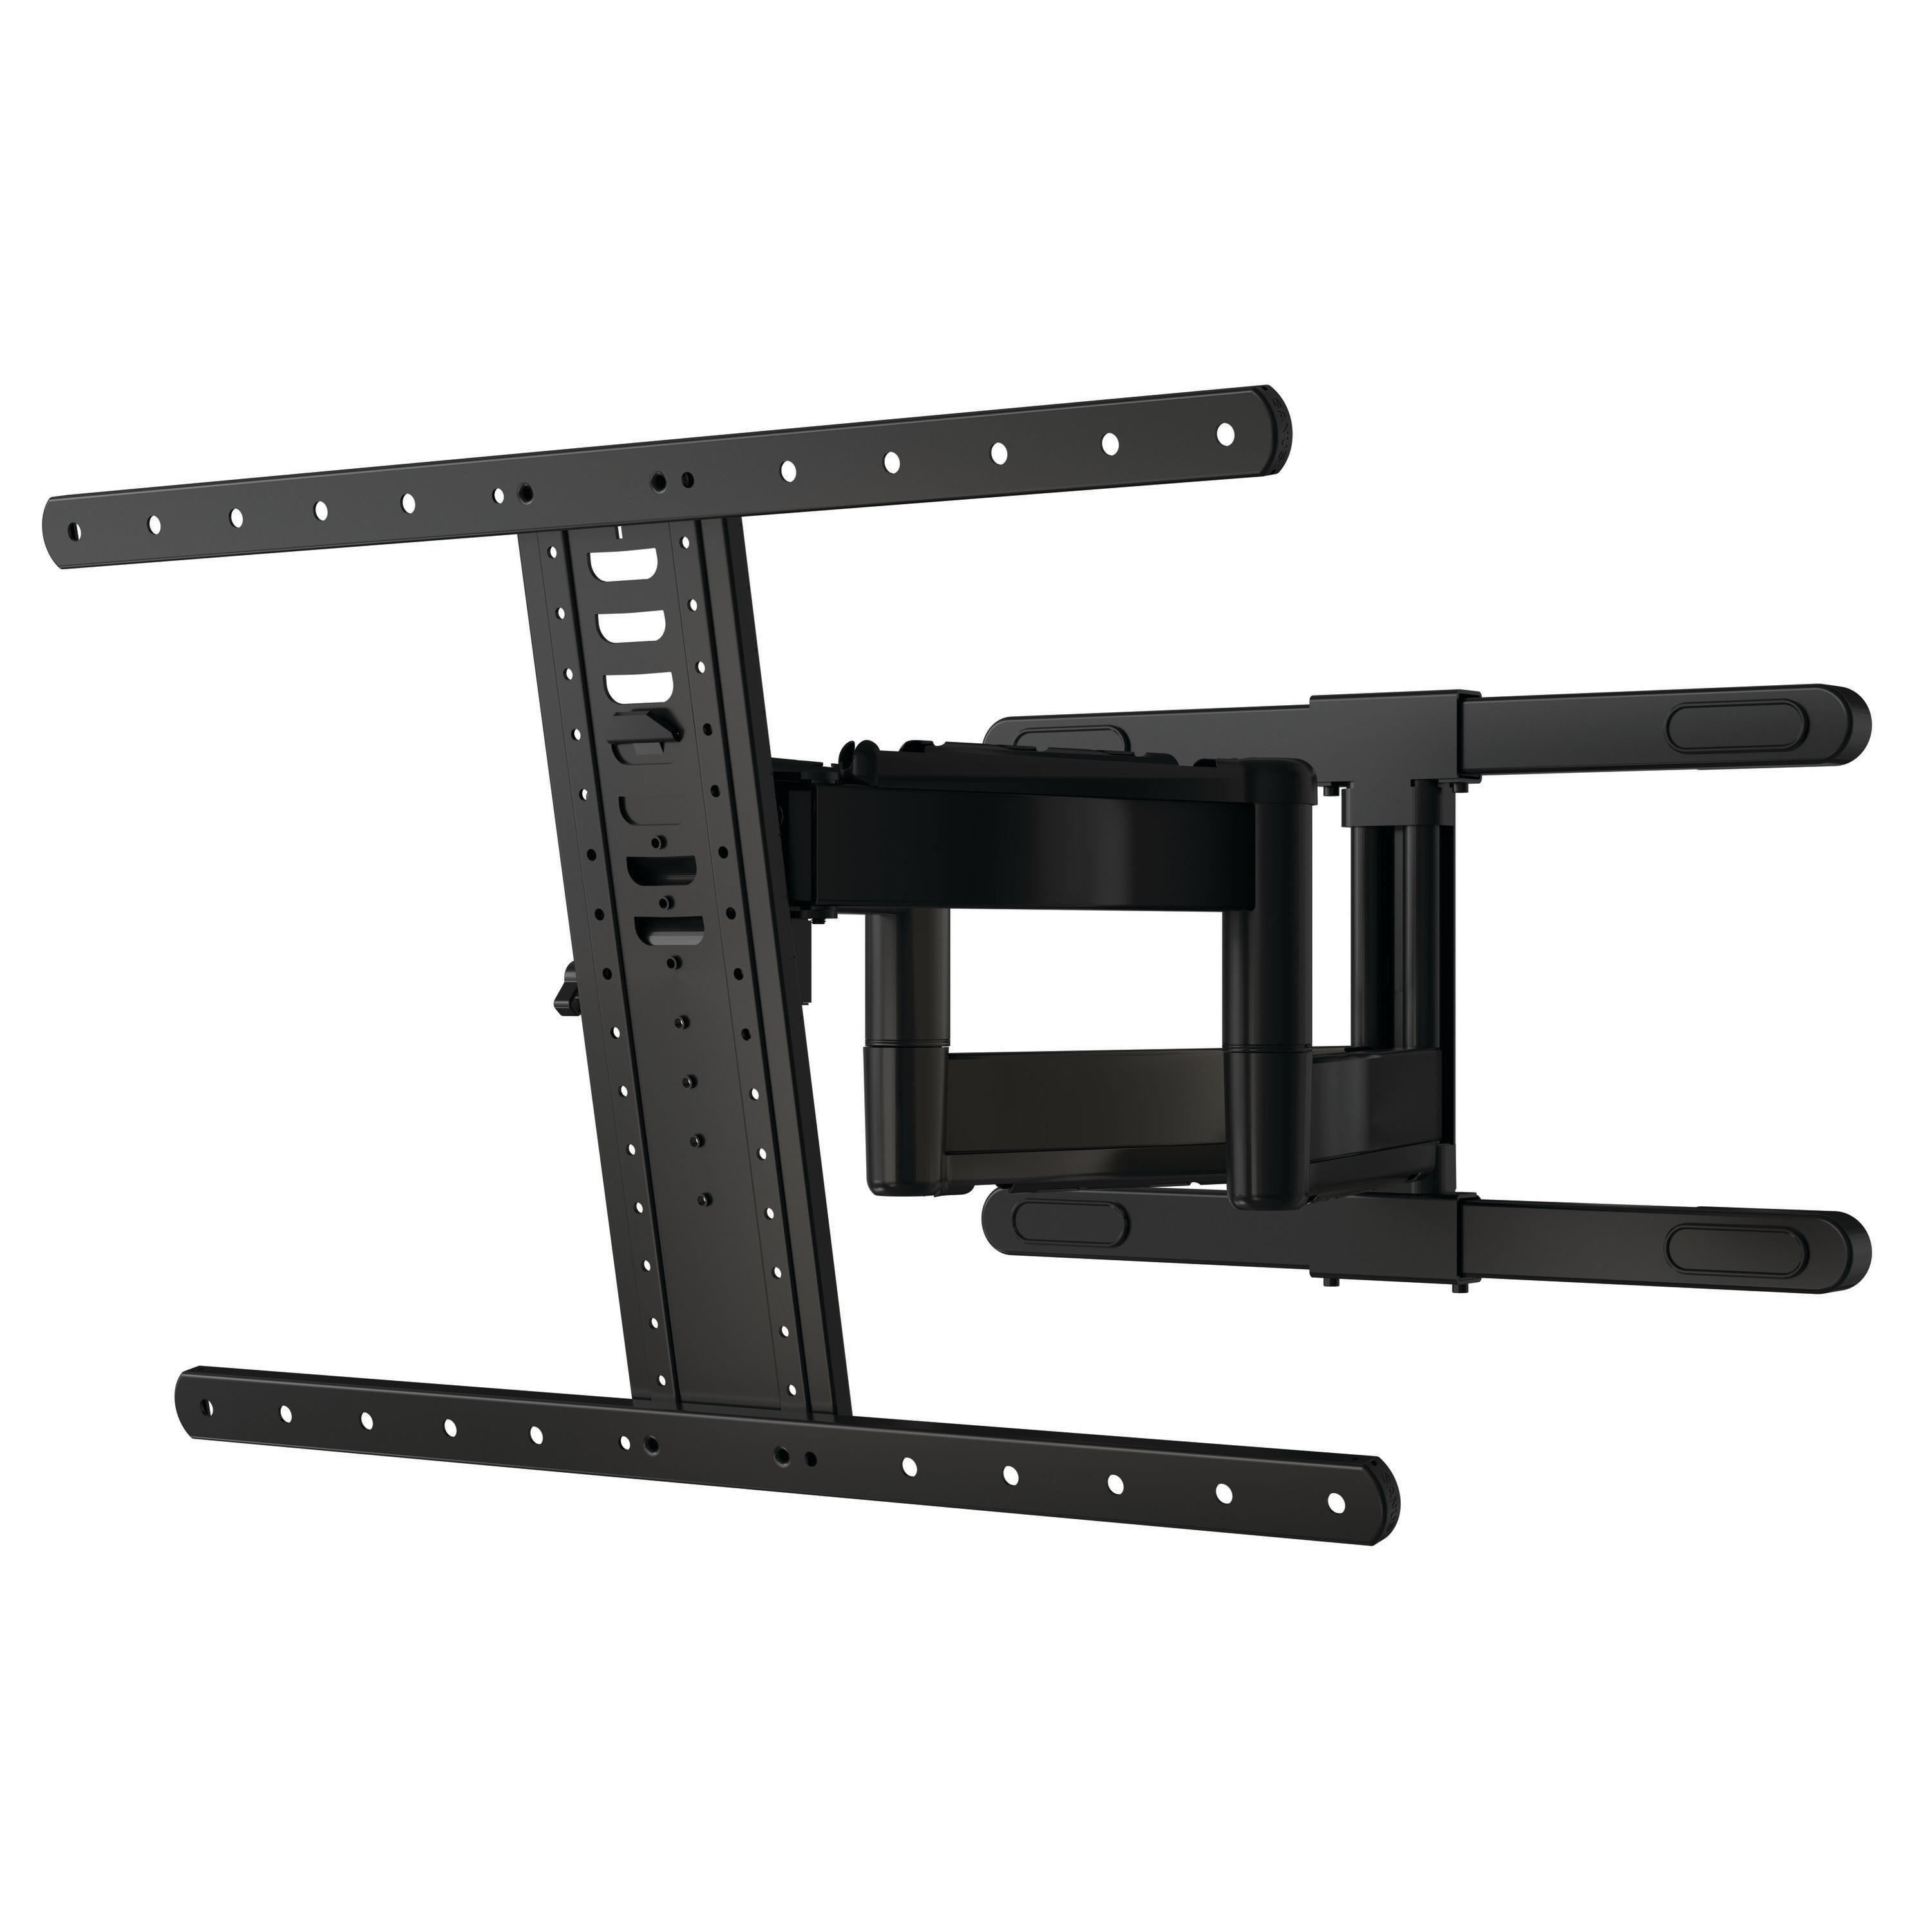 Full Motion Indoor Wall TV Mount Fits TVs up to 90-in (Hardware Included) in Black | - Sanus LLF225B1